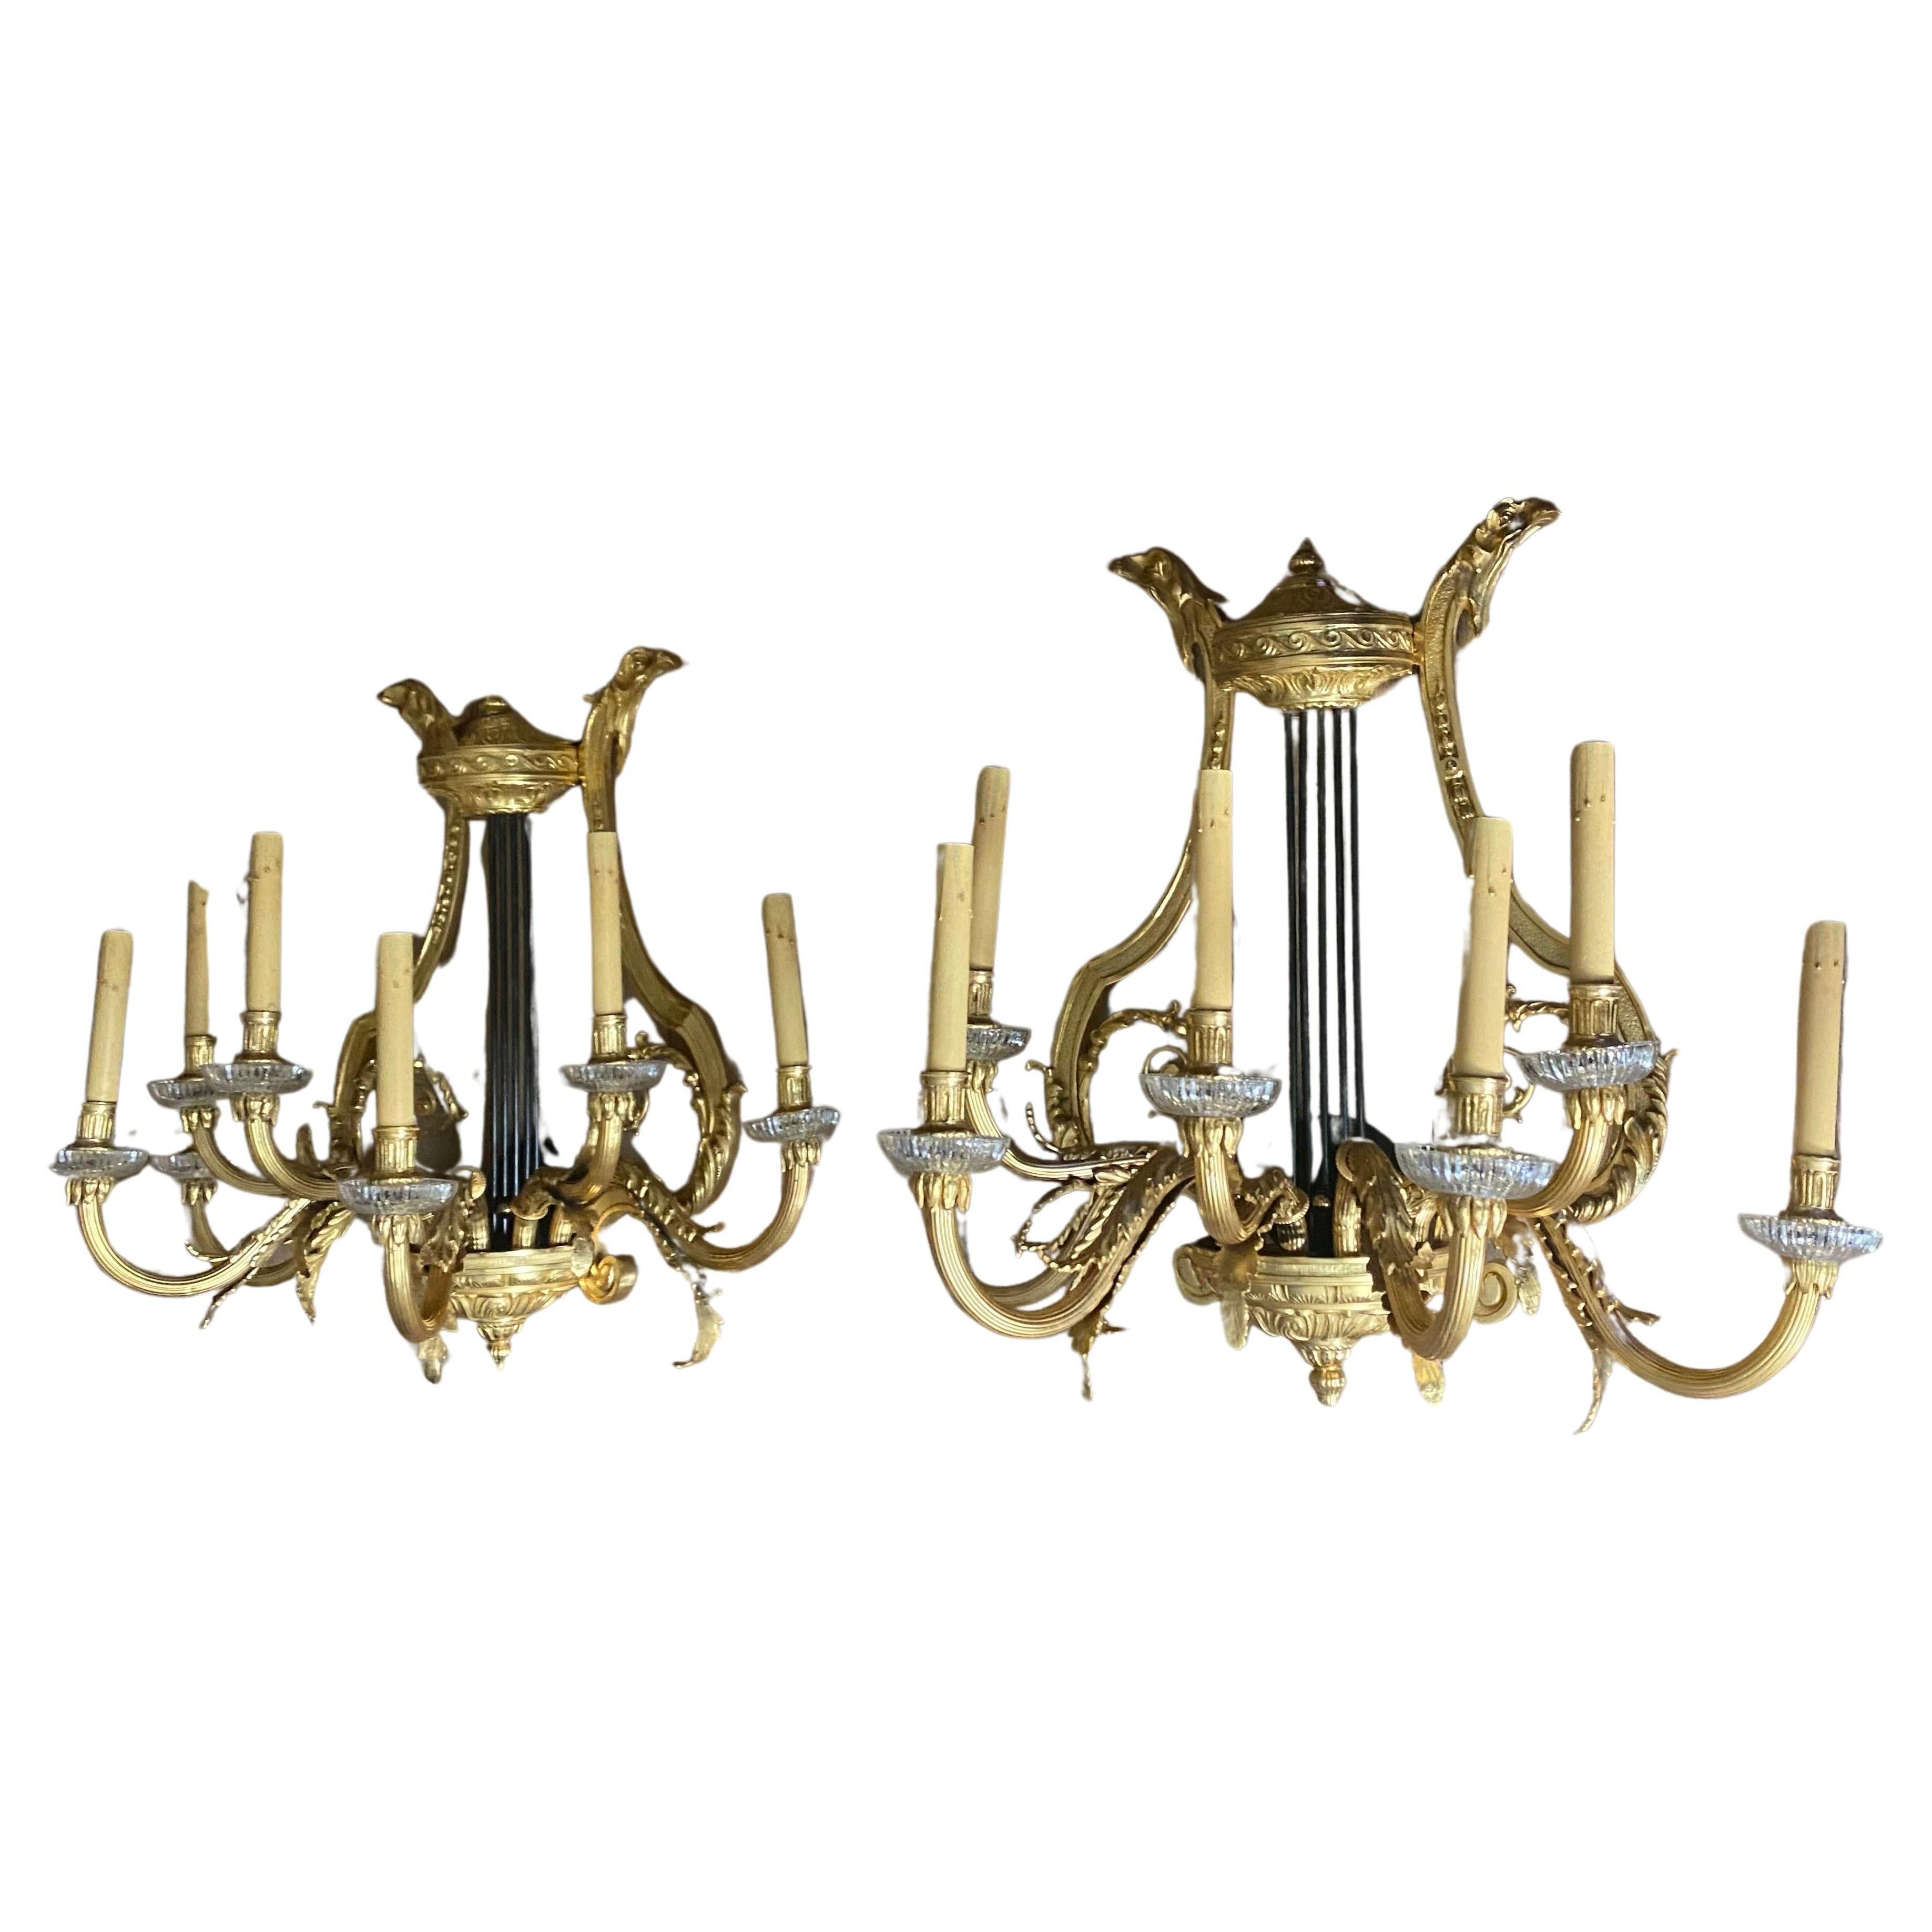 Crafted in the lavish, Louis XV style, these beautiful wall-lights were made in France in the late nineteenth century, and feature seven elegant gilt branches that finish in floral motifs which form the lighting mounts with fluted glass drip